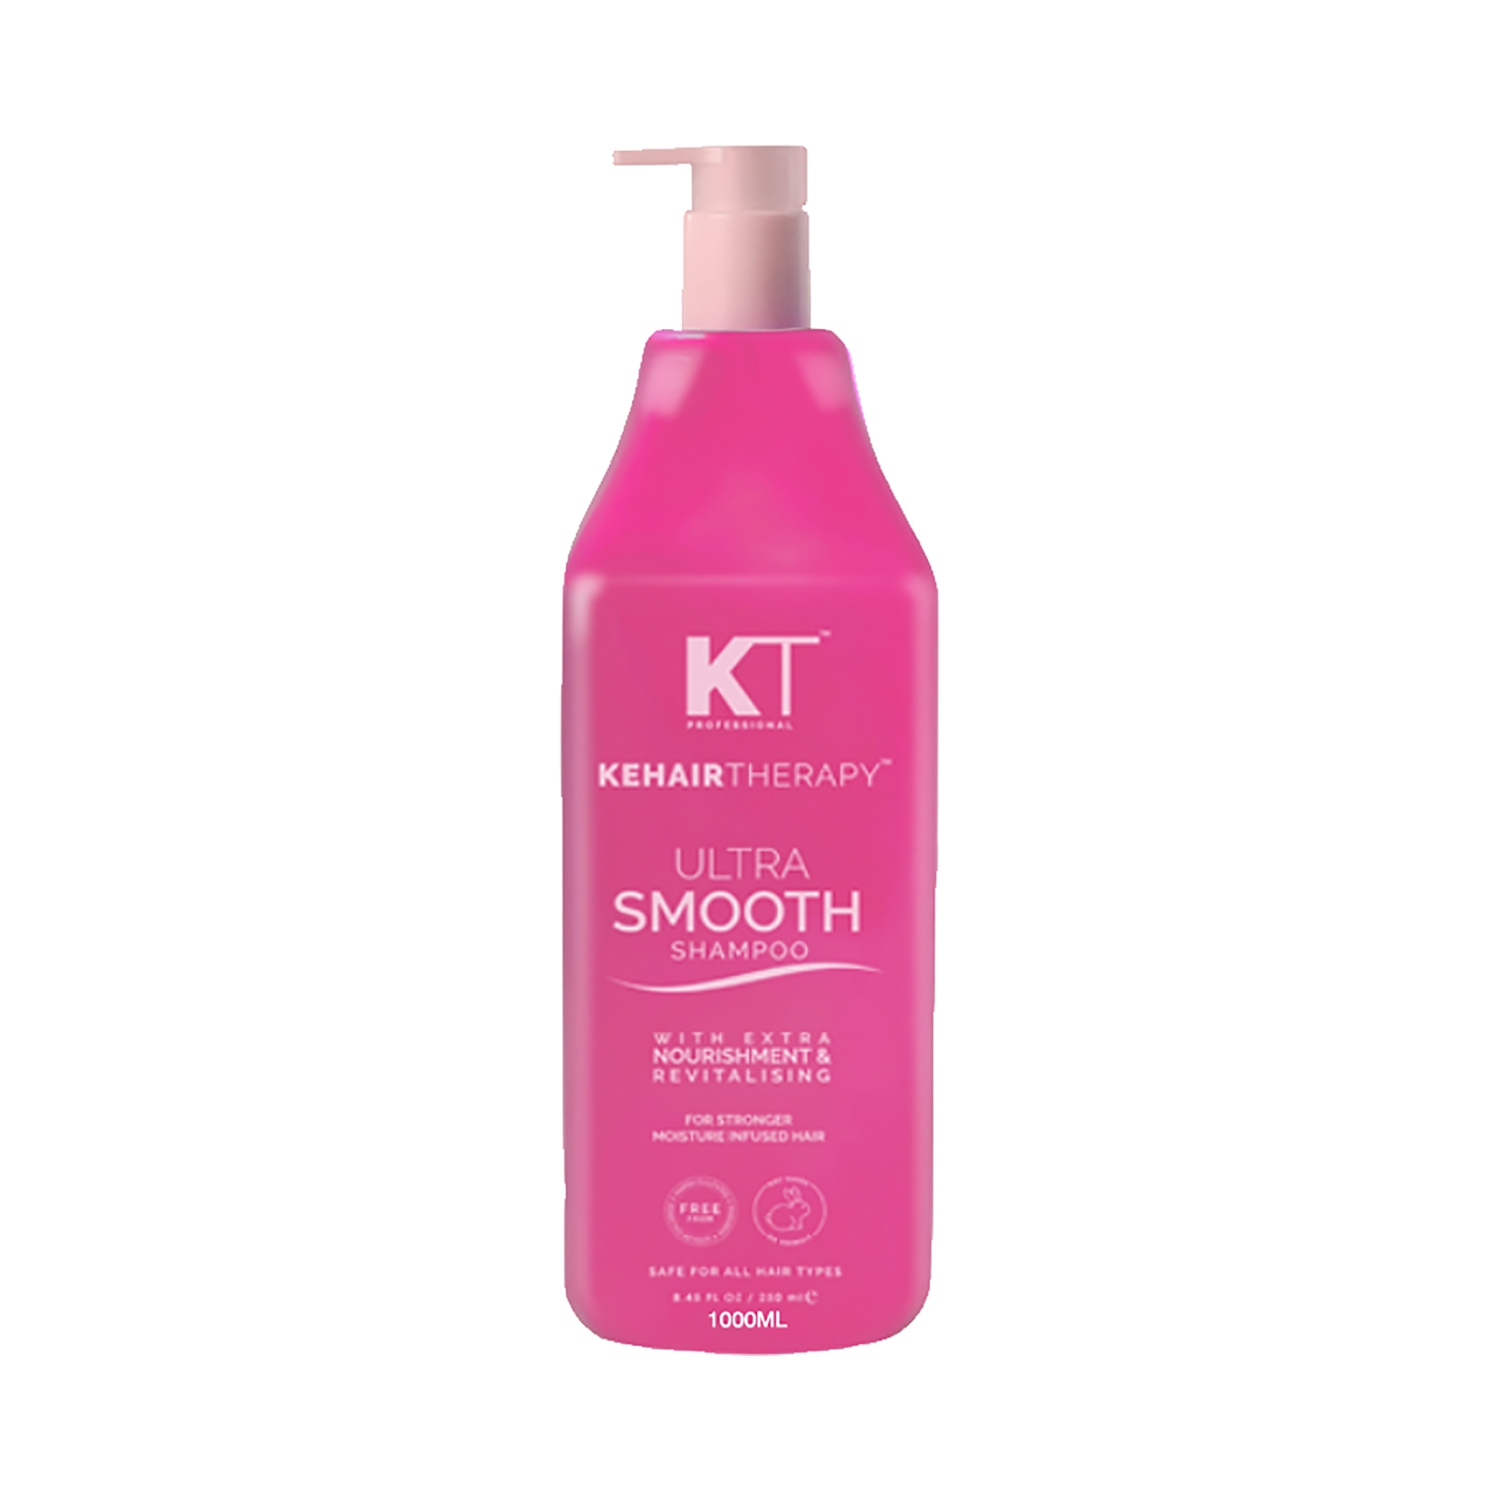 KT Professional | KT Professional Kehairtherapy Ultra Smooth Shampoo (1000ml)